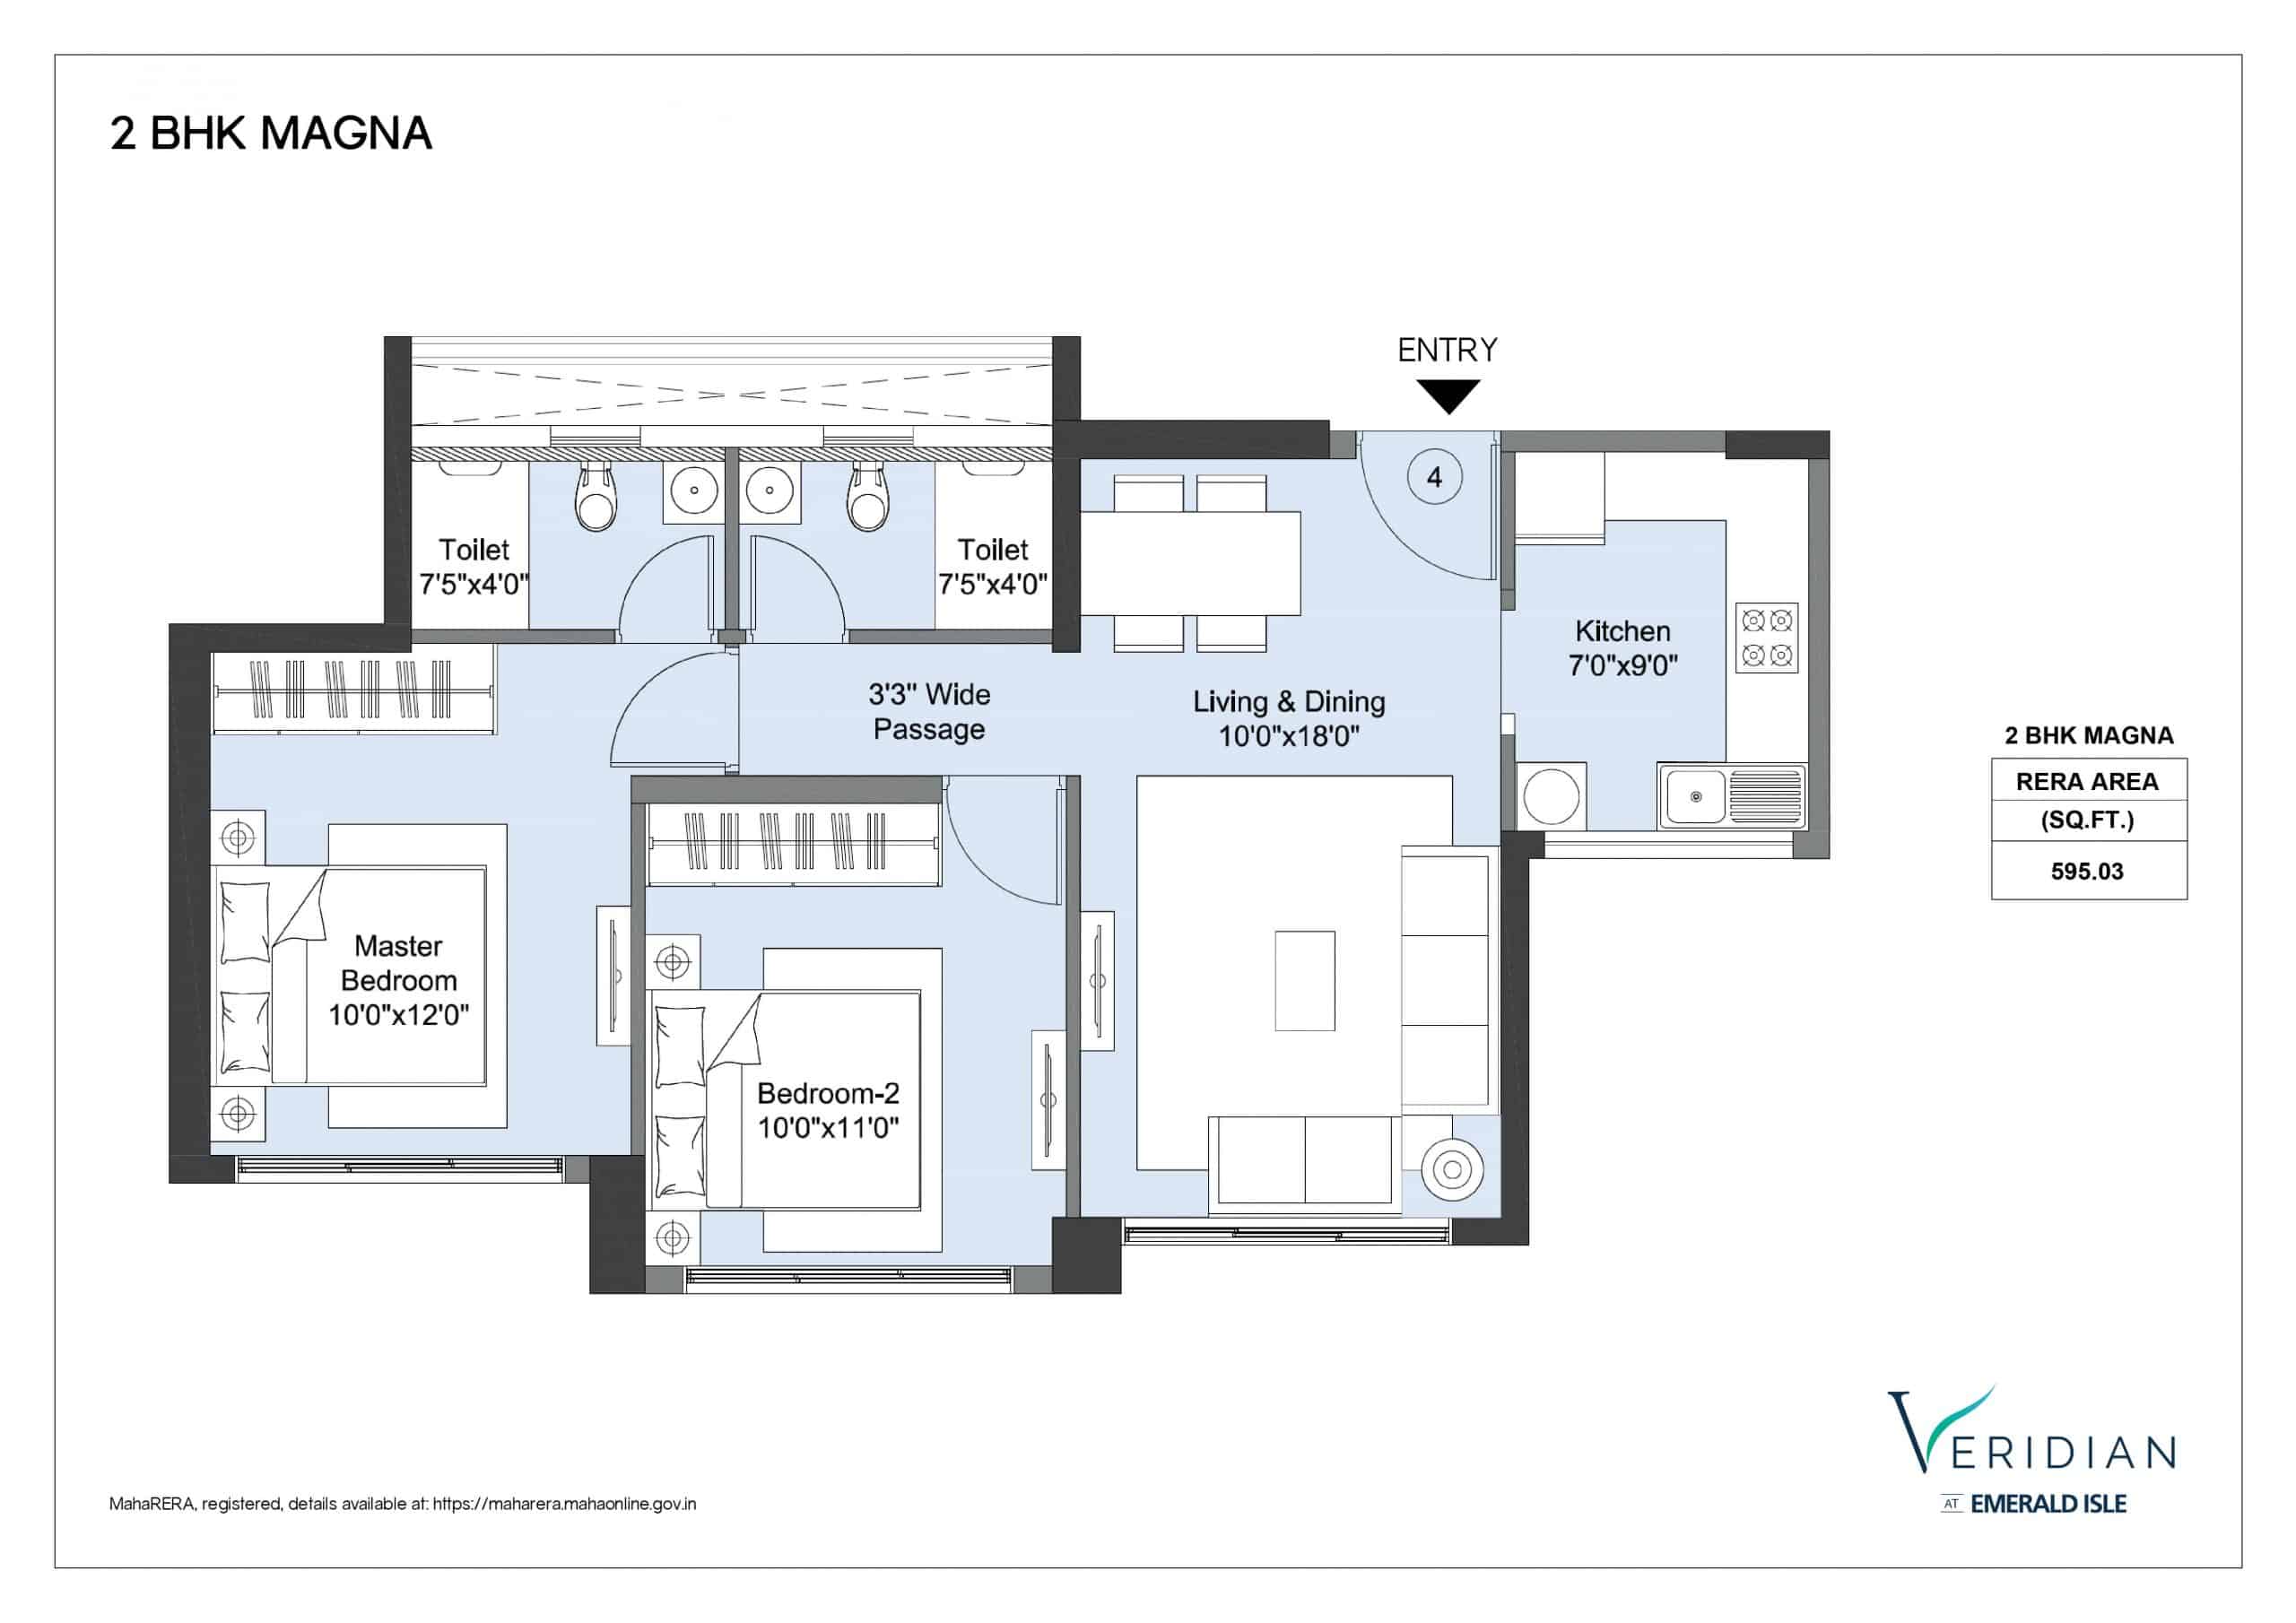 2 BHK Magna at Veridian scaled